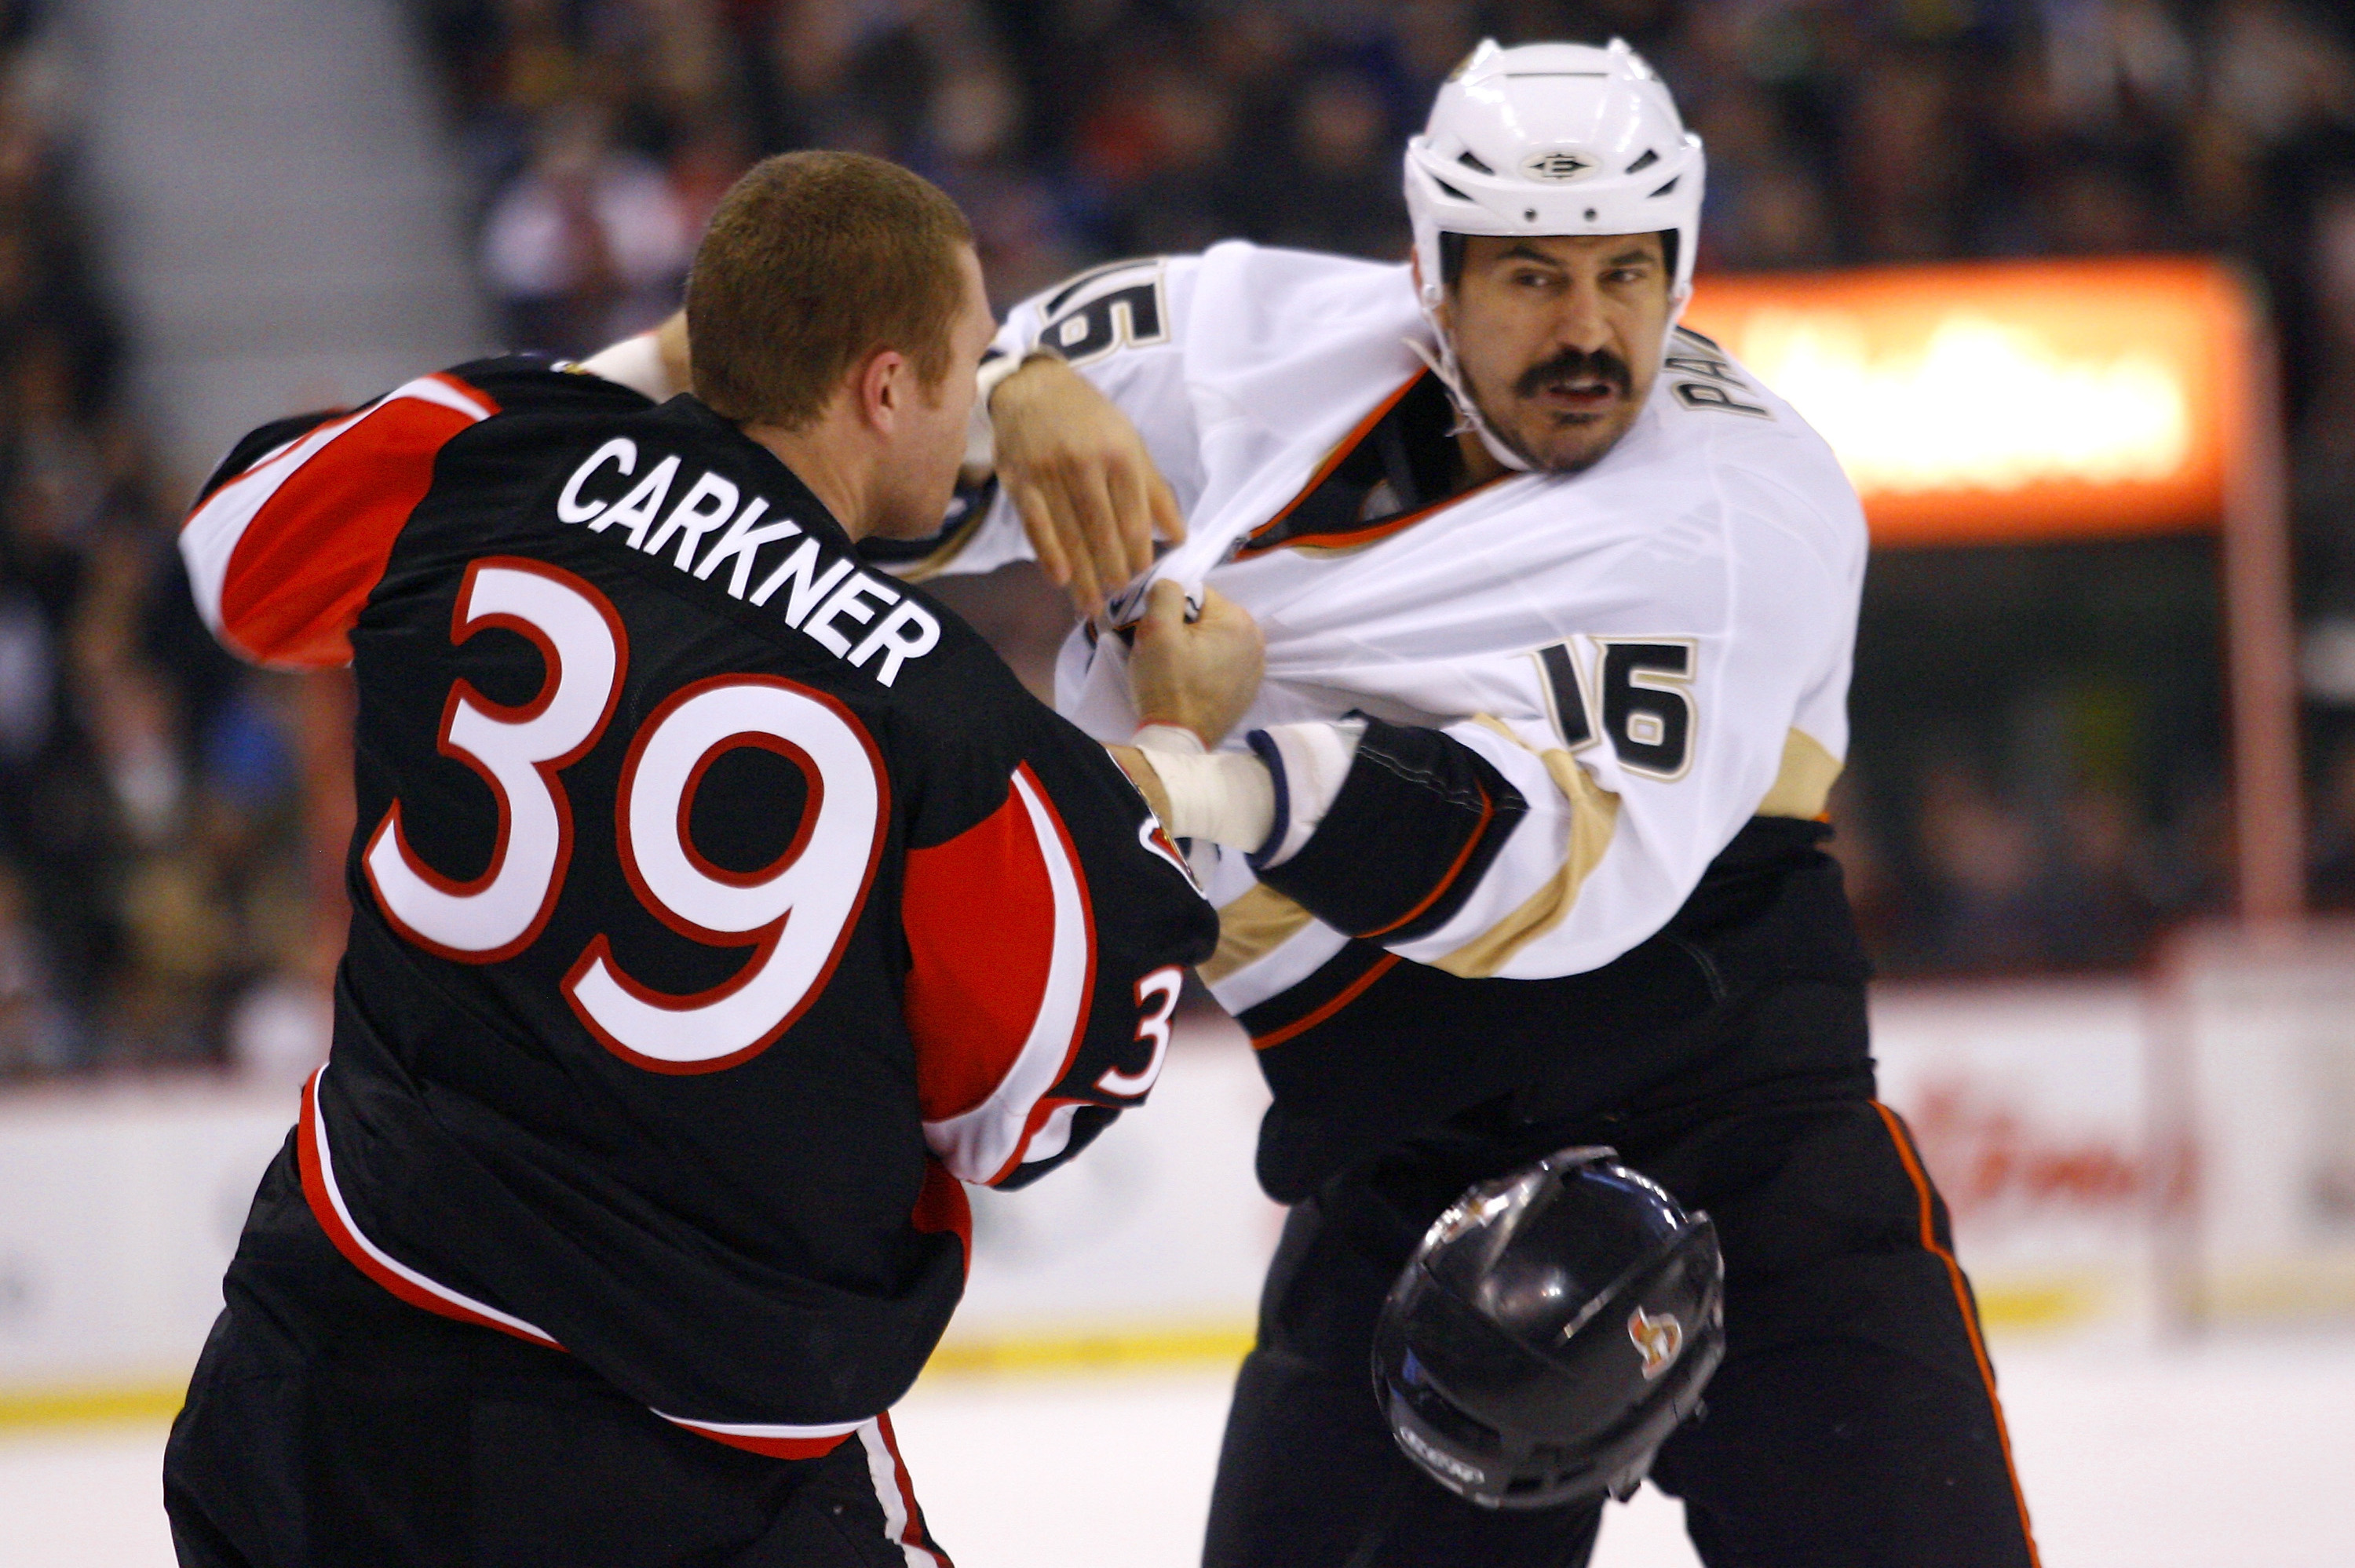 The Code: The Unwritten Rules of Fighting and Retaliation in the NHL